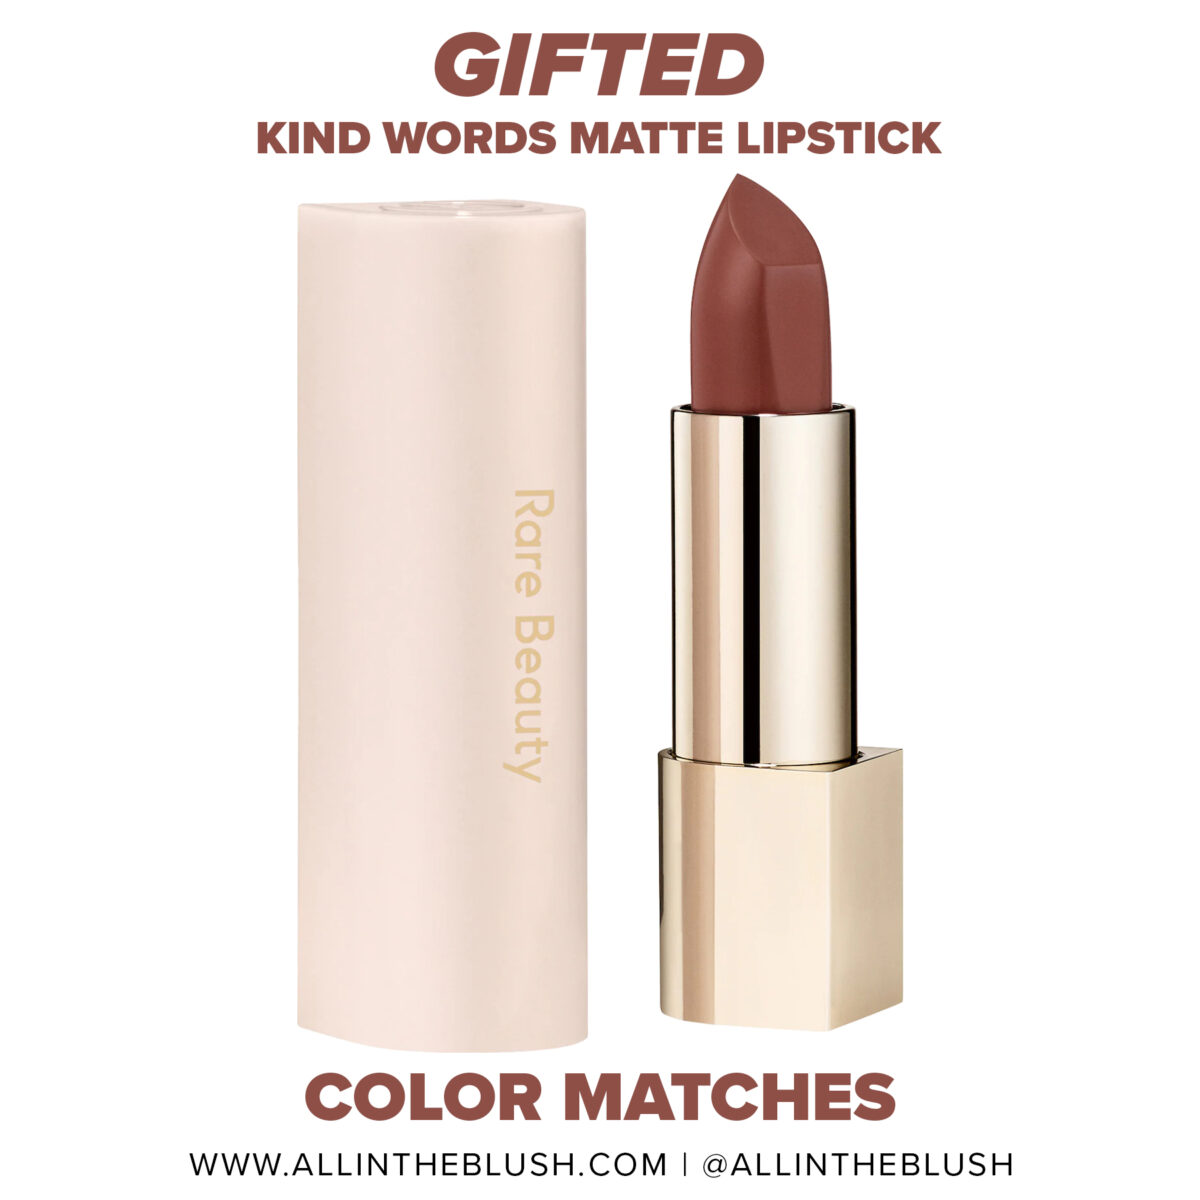 Rare Beauty Gifted Kind Words Matte Lipstick Color Matches